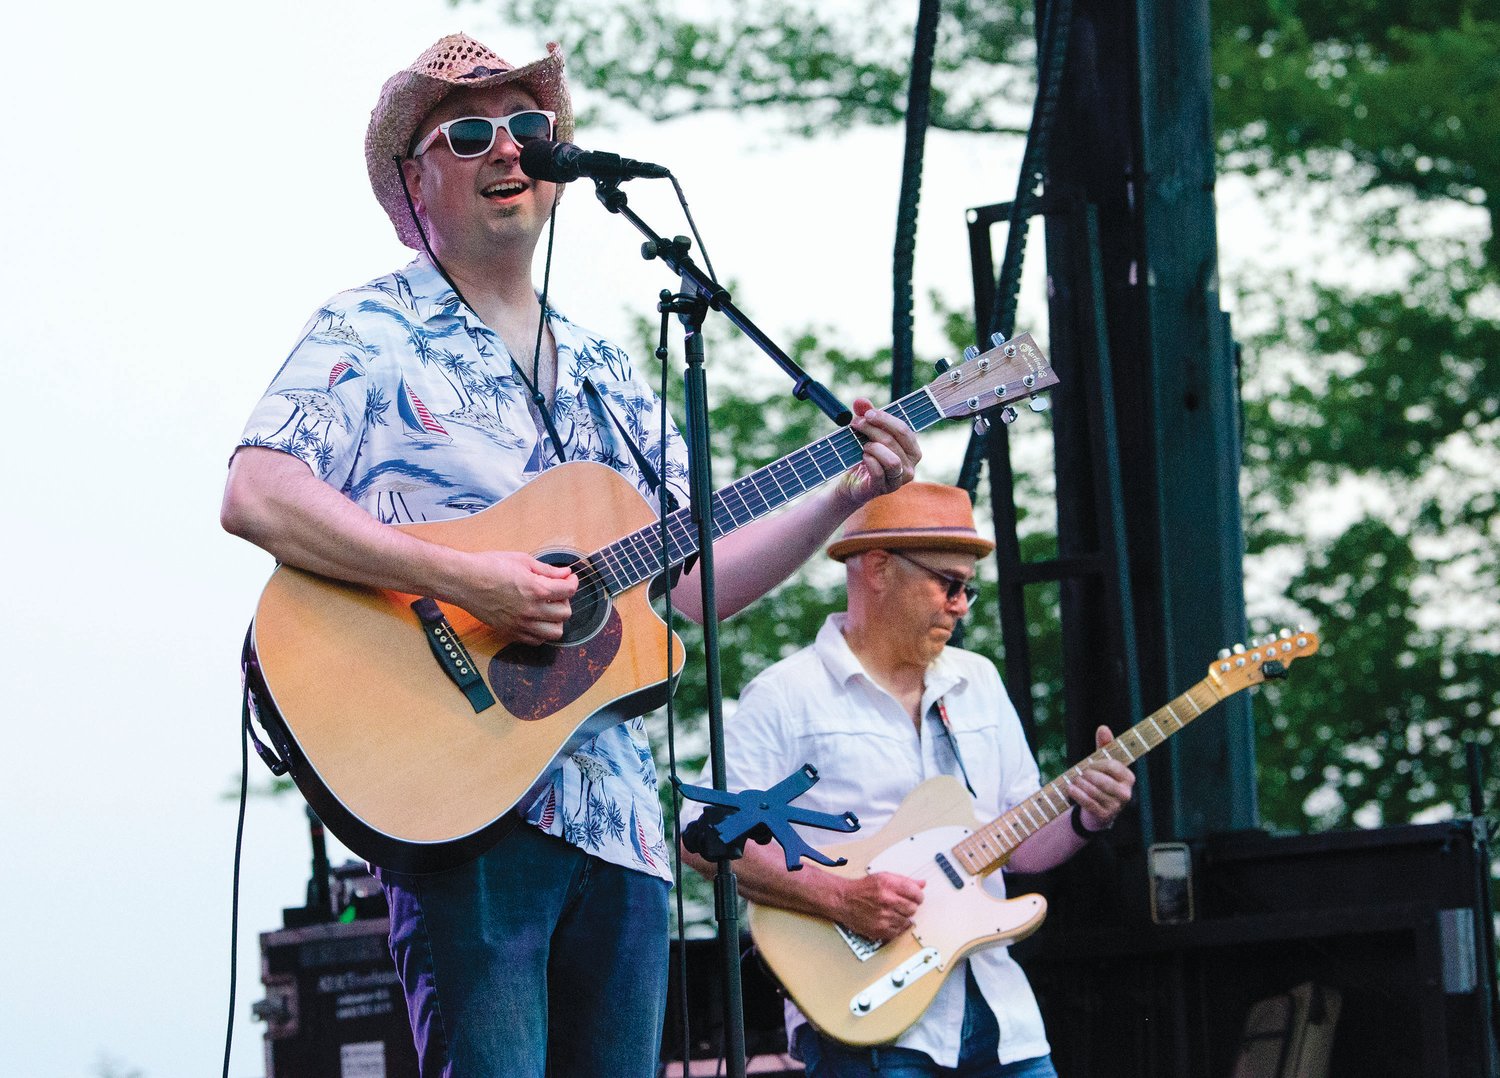 Andre Arsenault & Friends perform on opening night of the Bristol Fourth of July Concert Series this Sunday, June 19